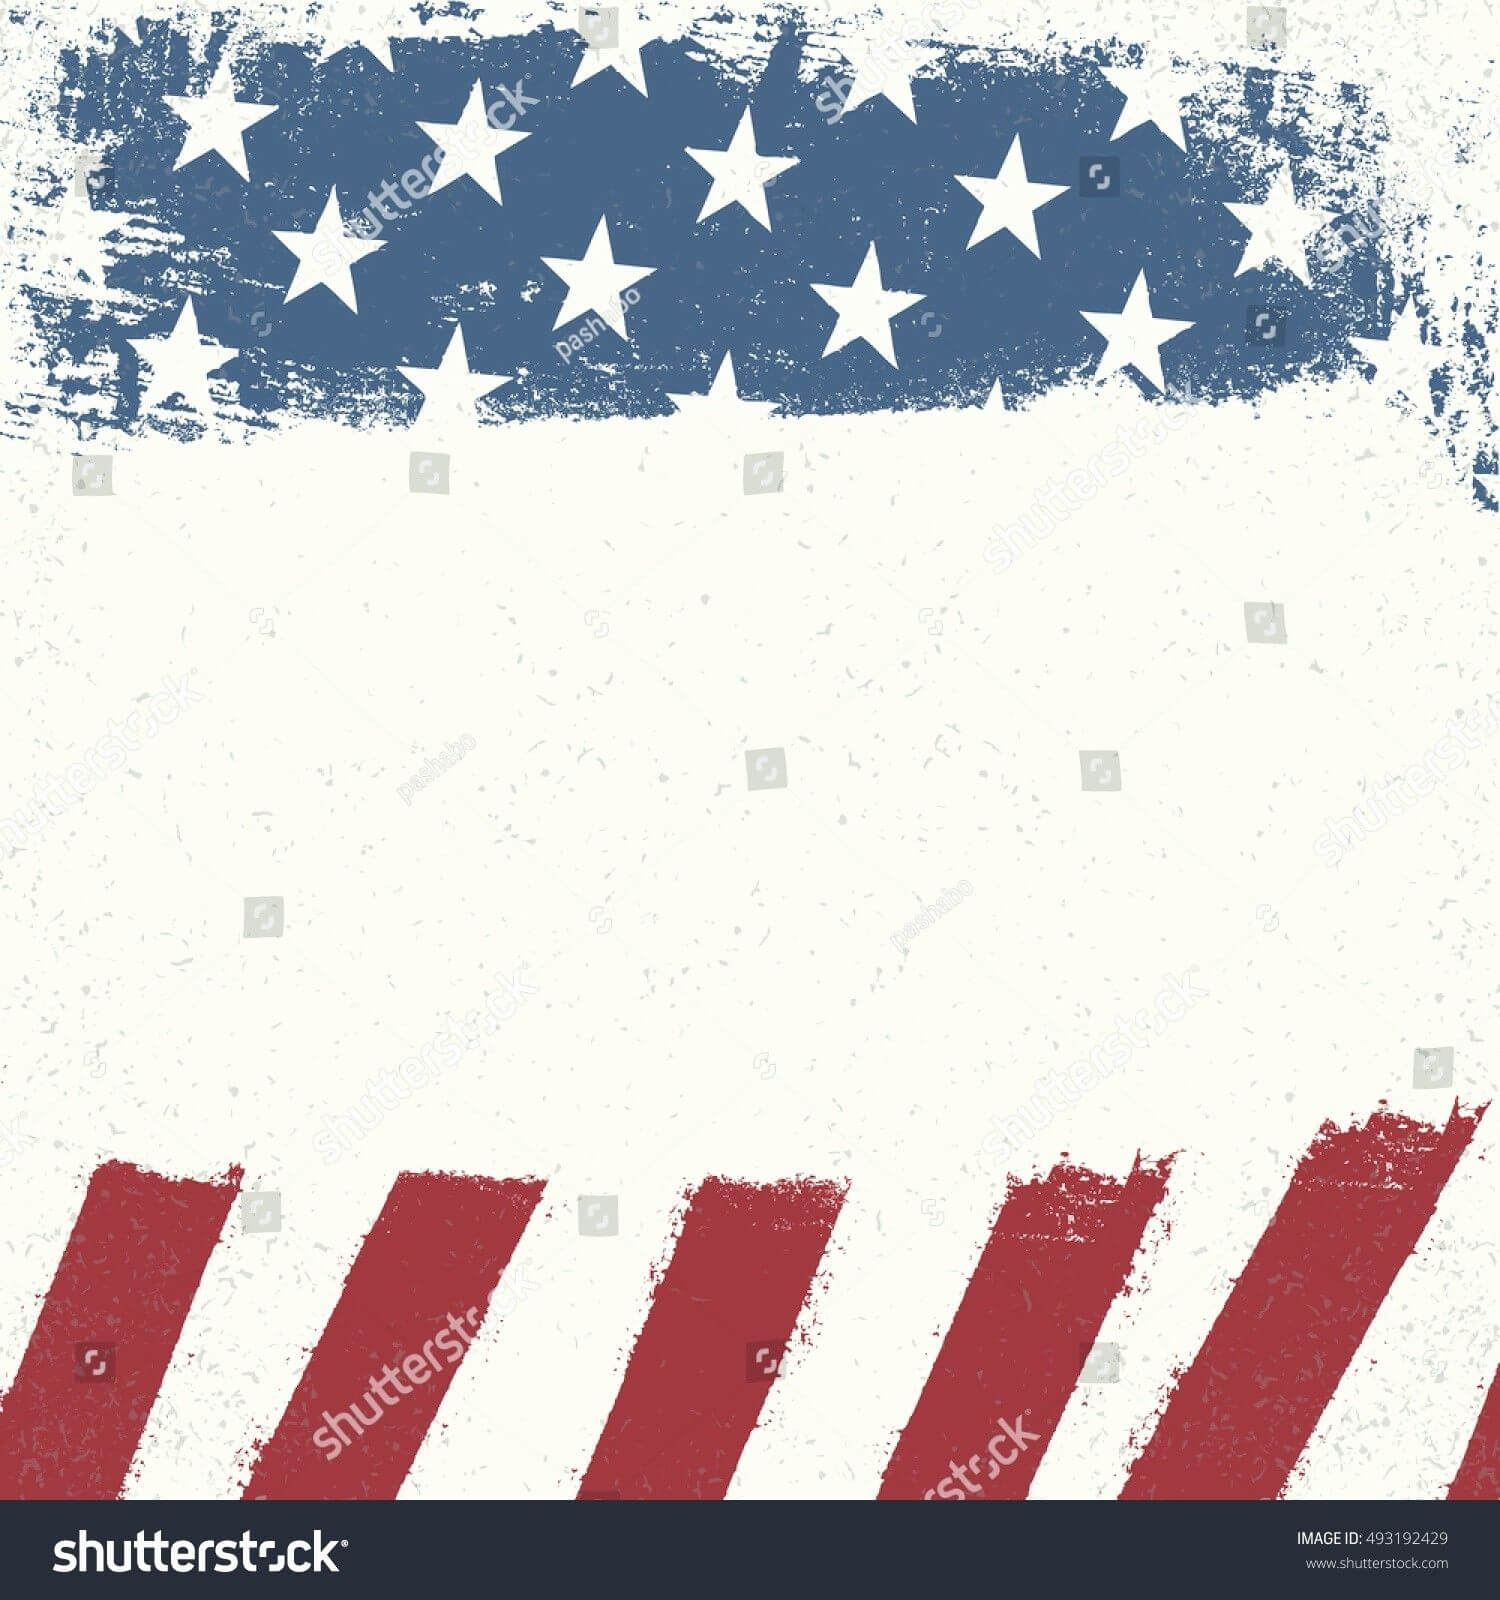 Patriotic Powerpoint Template Awesome Usa Powerpoint Regarding Patriotic Powerpoint Template